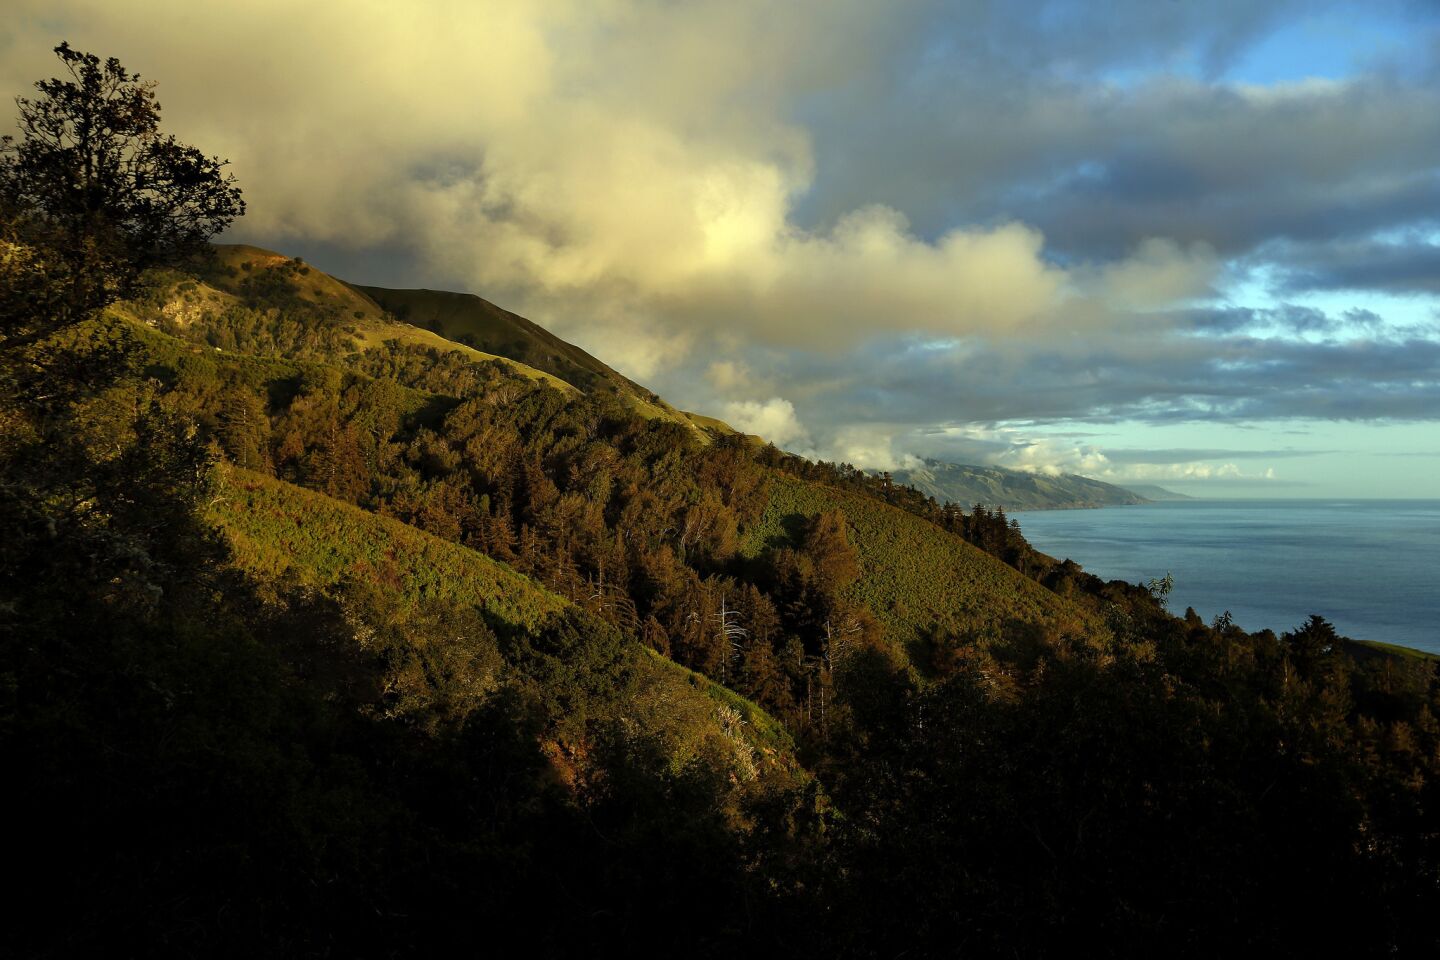 Clouds roll in over a section of hillside above the Ventana Inn in Big Sur on March 4, 2017. The area has been isolated since winter rains closed a stretch of Highway One.